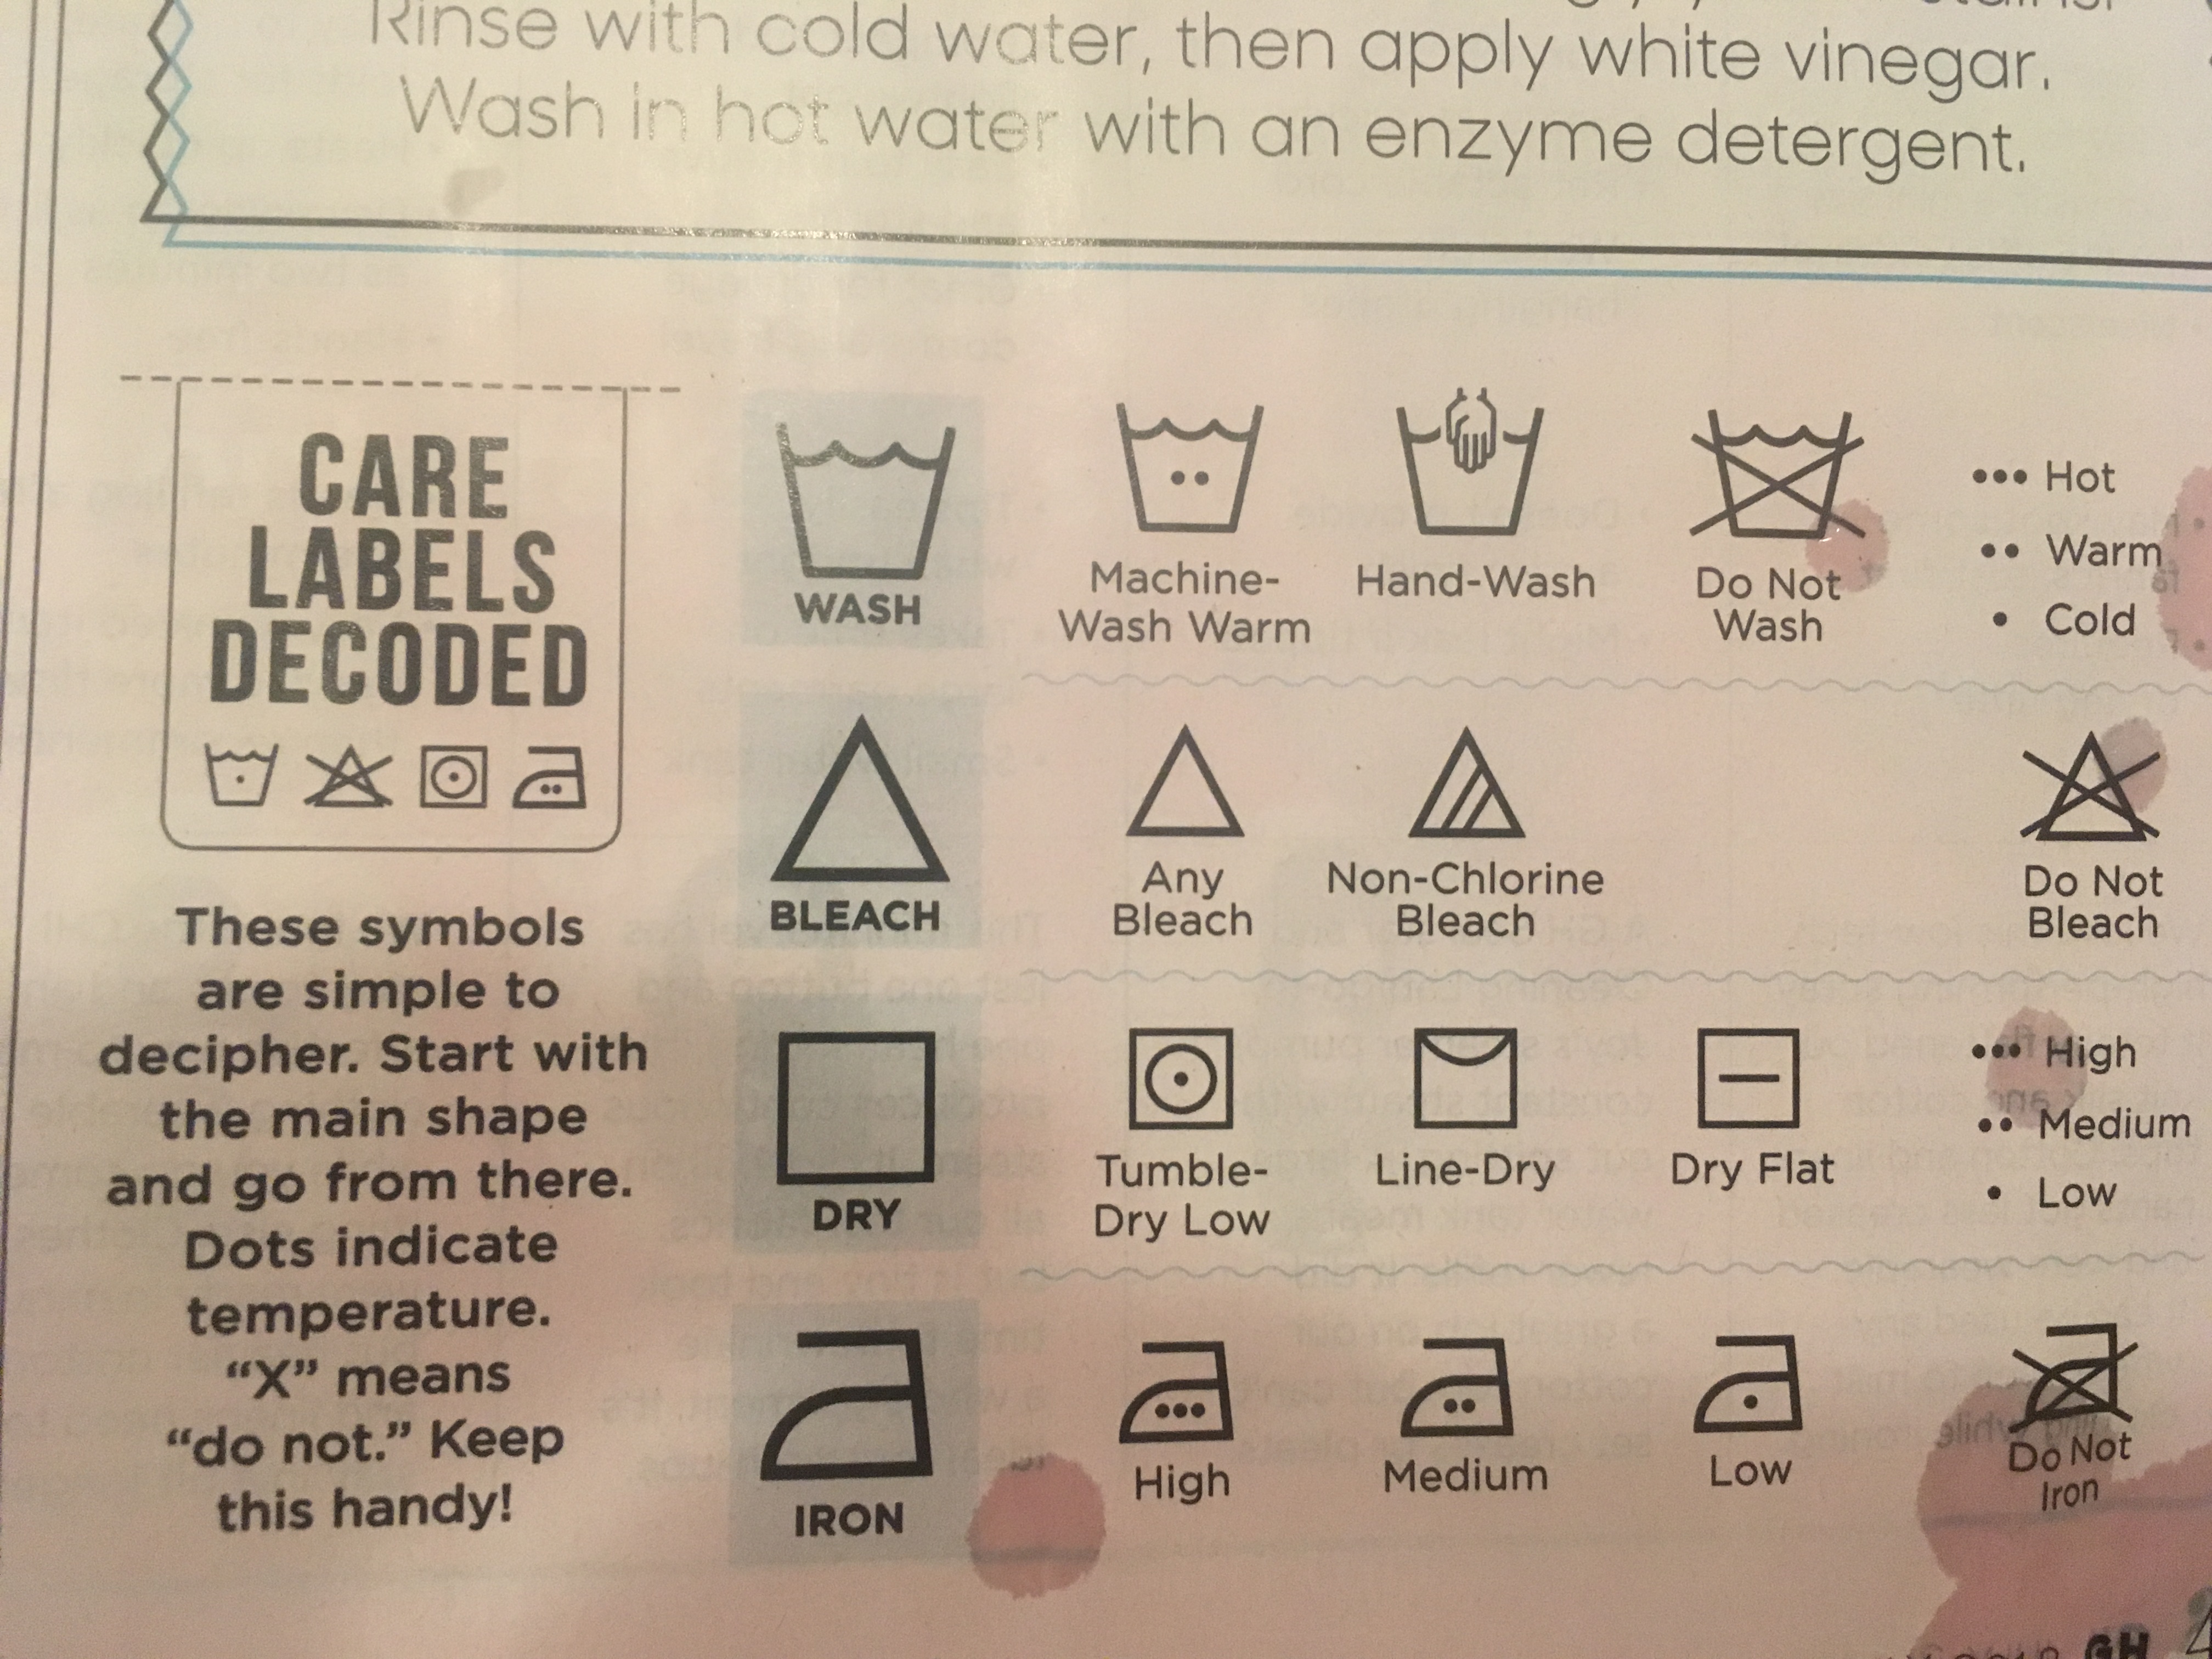 angle - Rinse with cold water, then apply white vinegar. Wash in hot water with an enzyme detergent. Care Labels Decoded Hot .. Warm Cold | Machine Wash Warm HandWash Do Not Wash Bleach Any Bleach NonChlorine Bleach Do Not Bleach High .. Medium Low LineDr